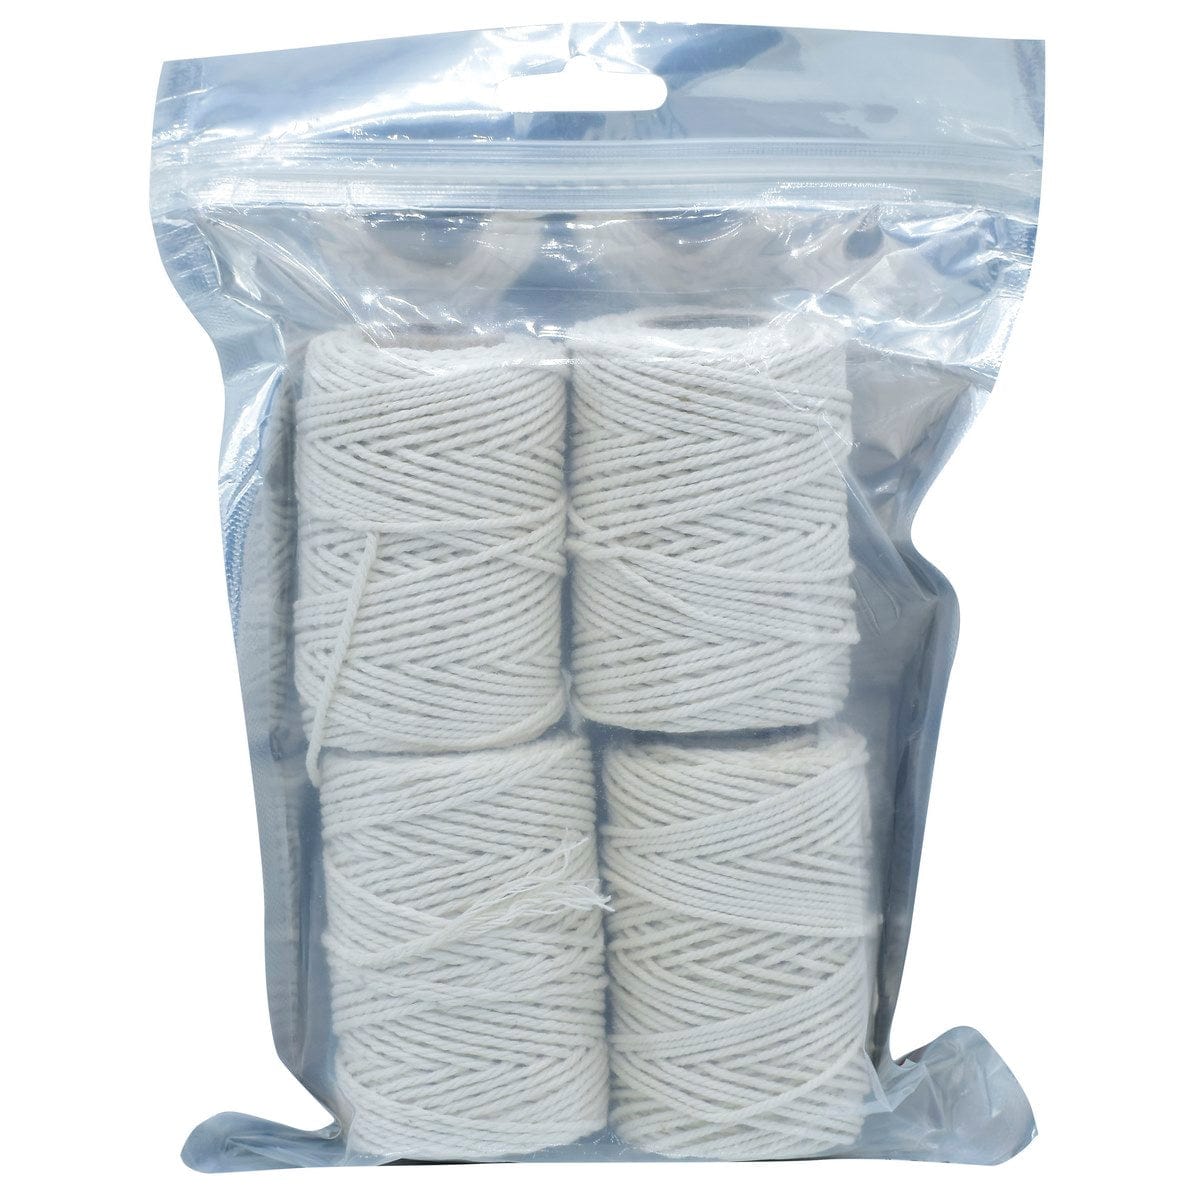 jags-mumbai Jute and paper rope Jags Craft Cotton Rope Off White Colour 4Pcs JCCR07